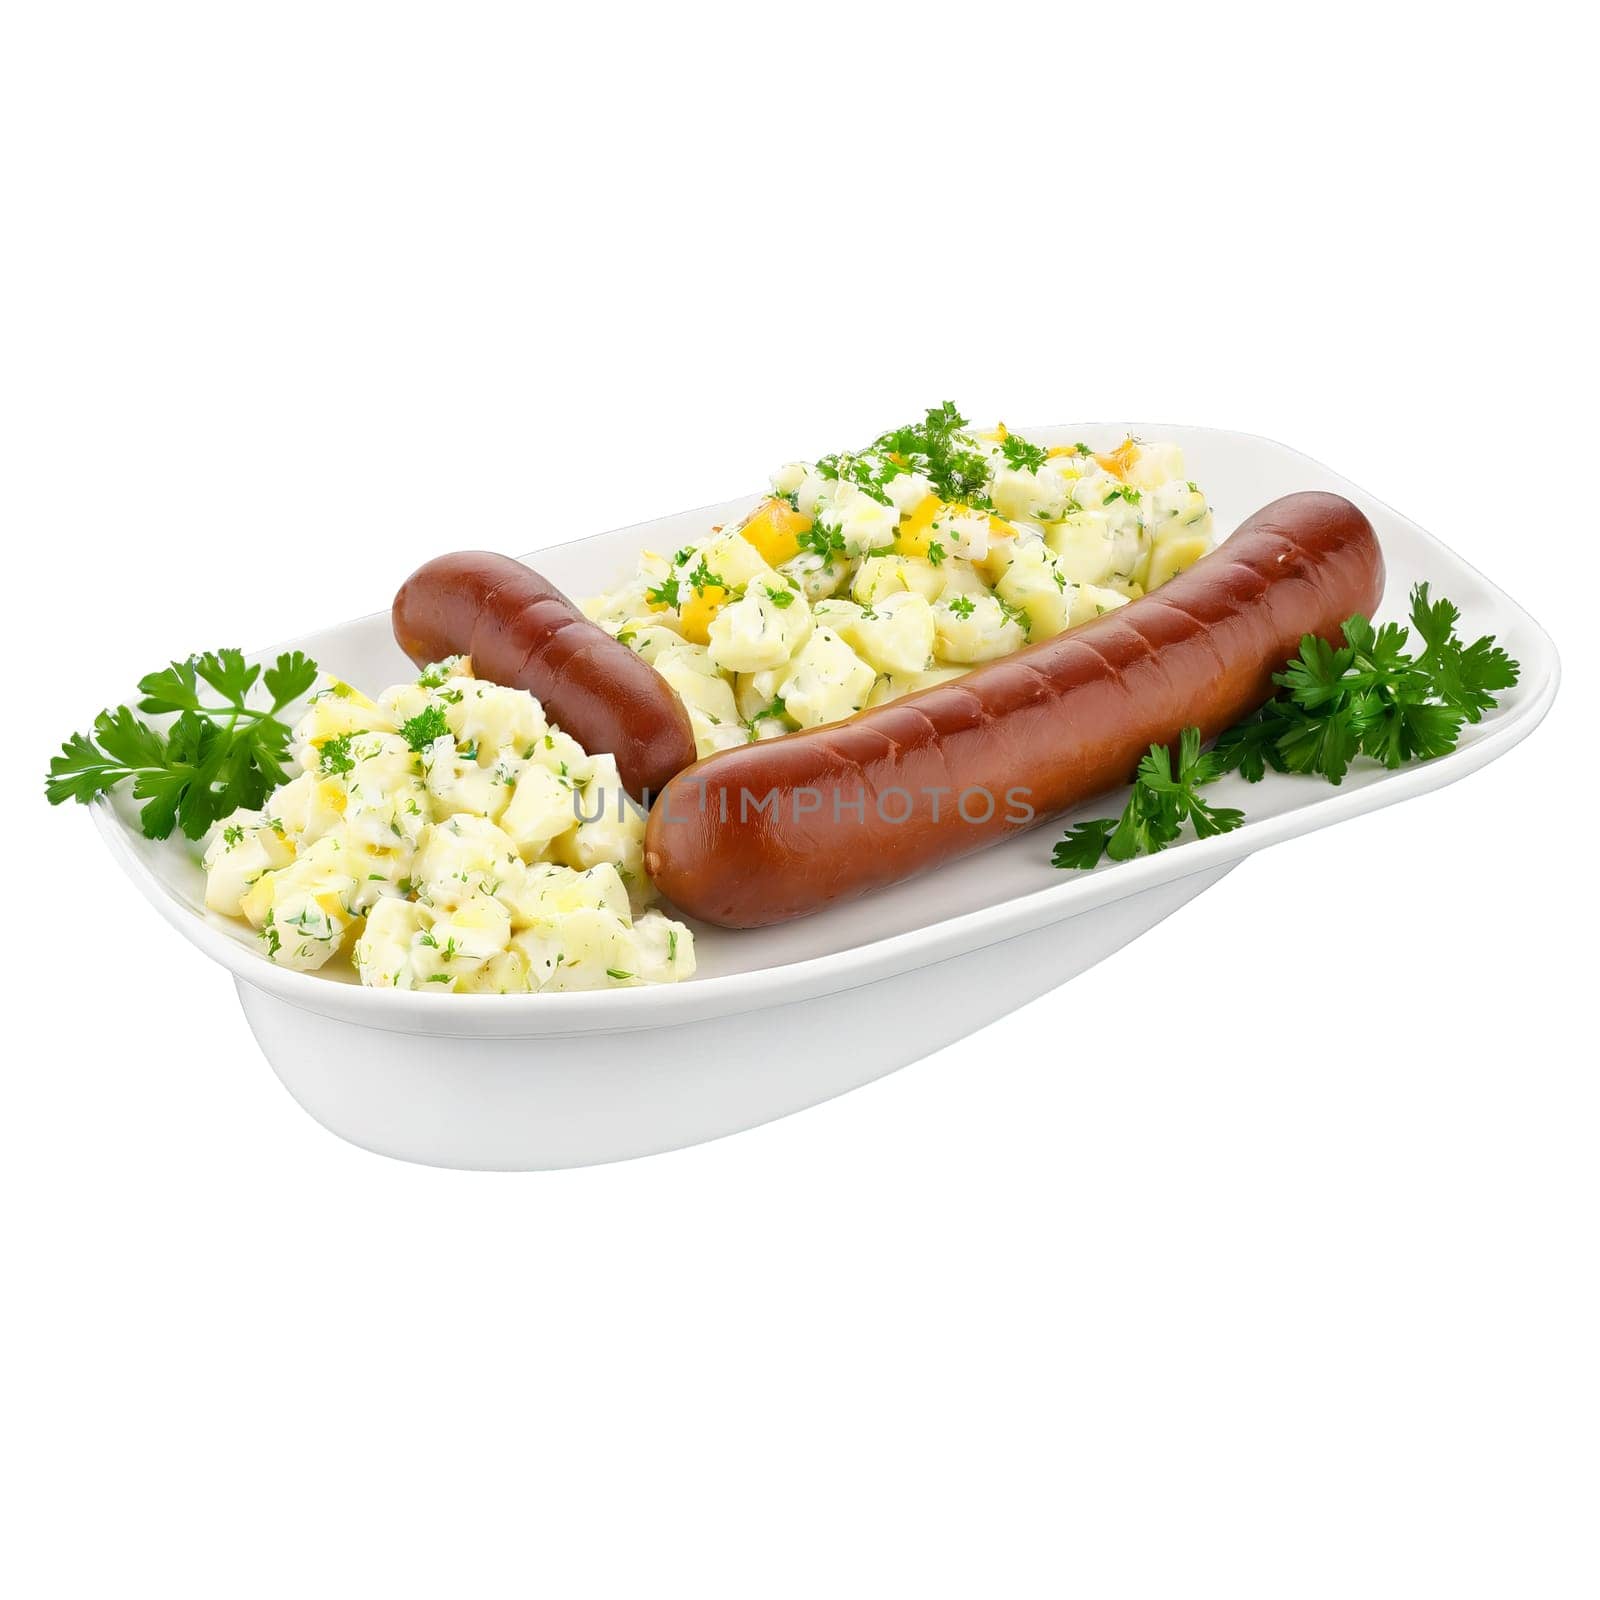 Knackwurst grilled and presented on a white porcelain plate with a side of potato salad. Food isolated on transparent background